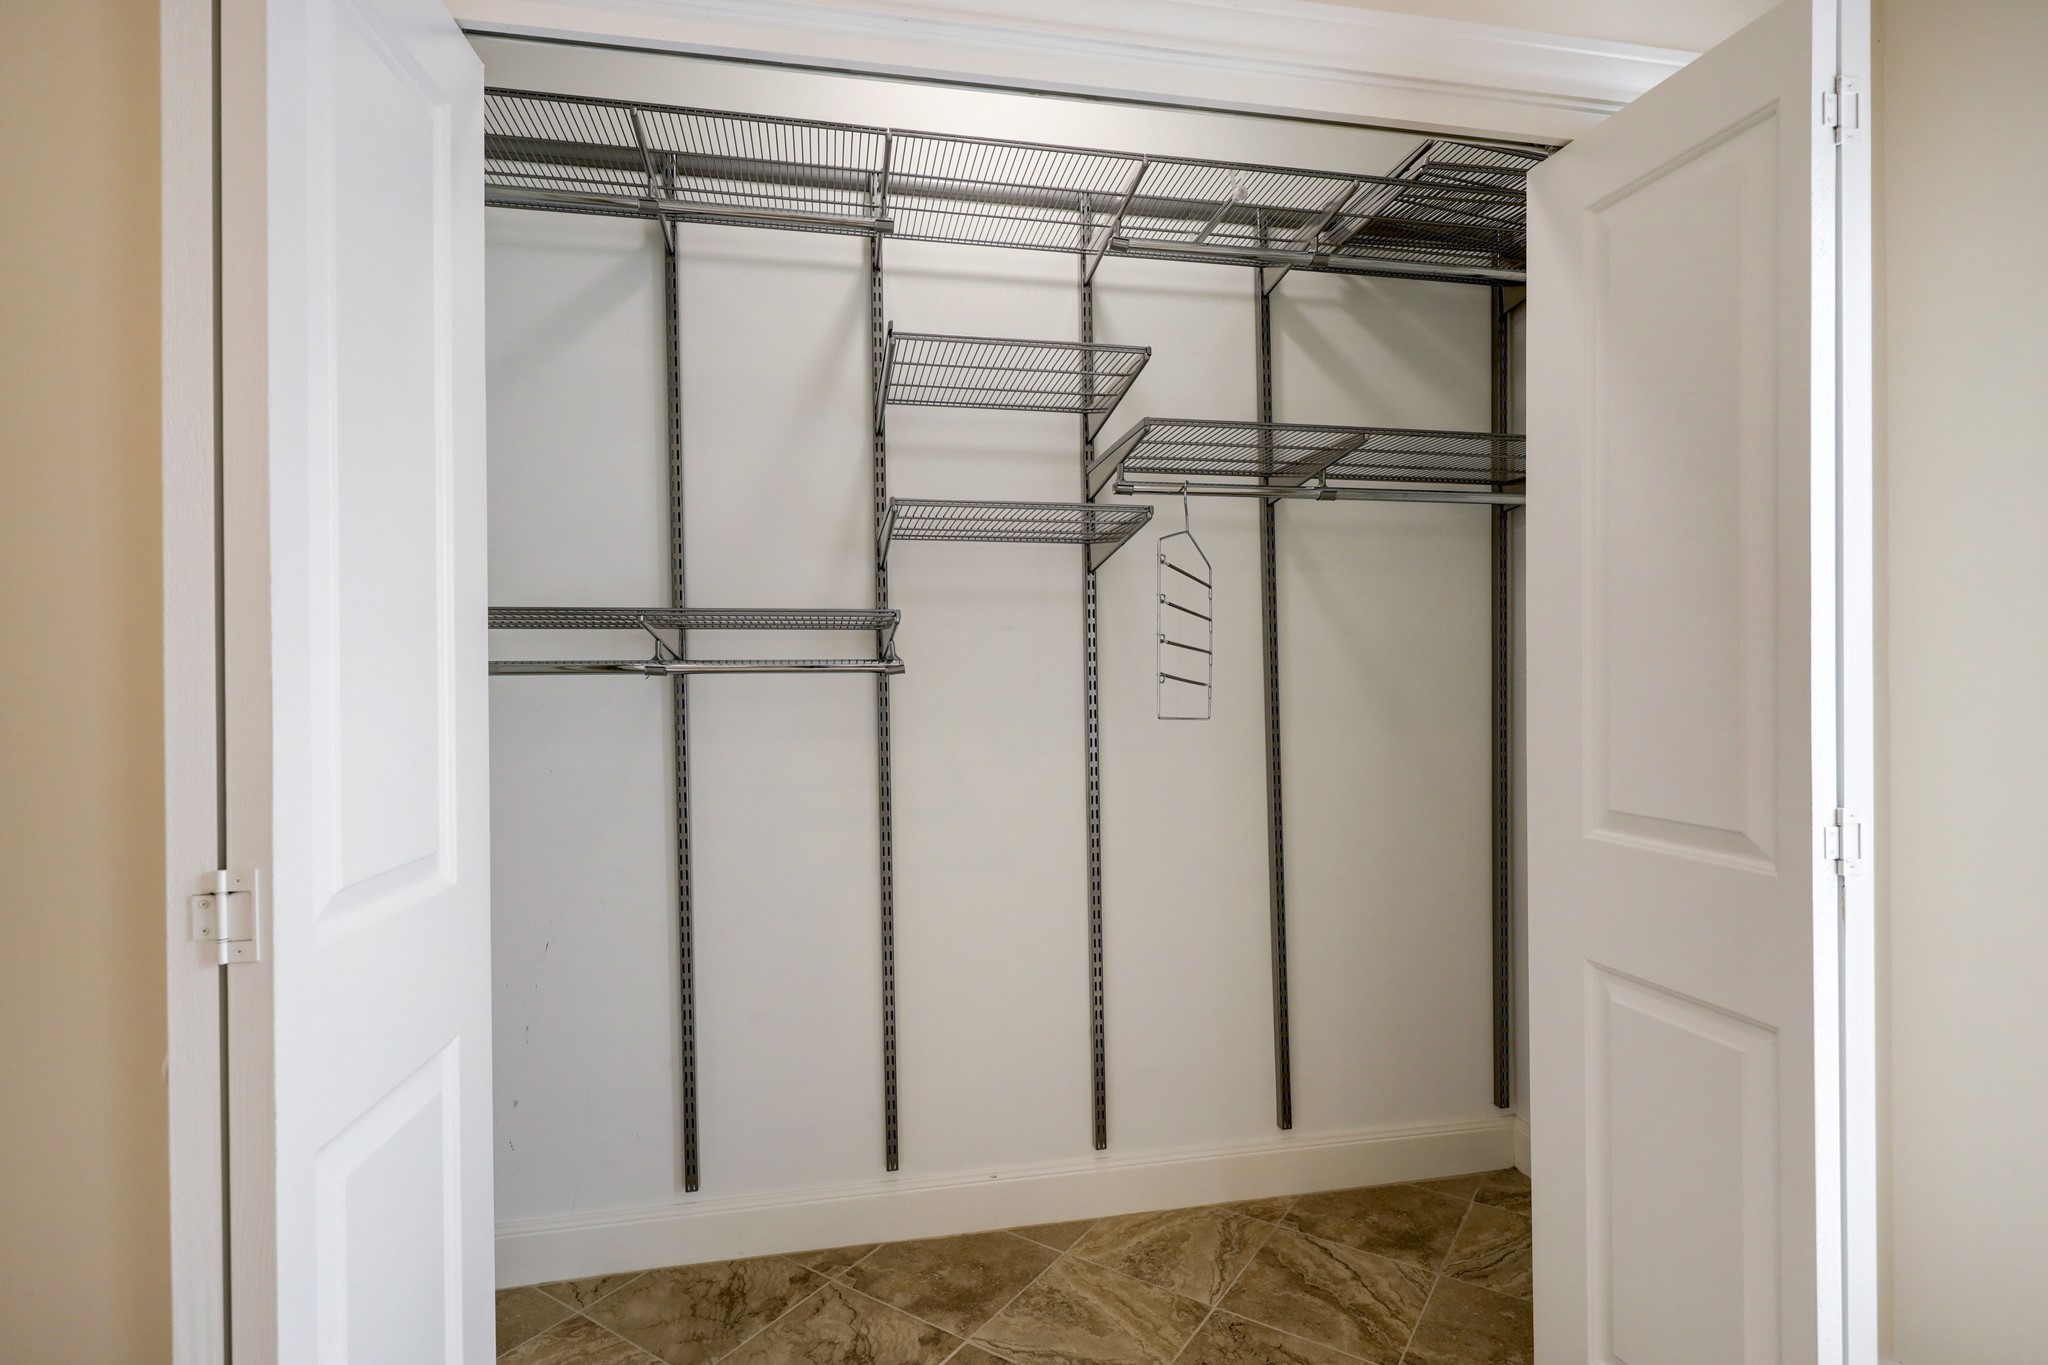 Secondary closet in the primary bedroom